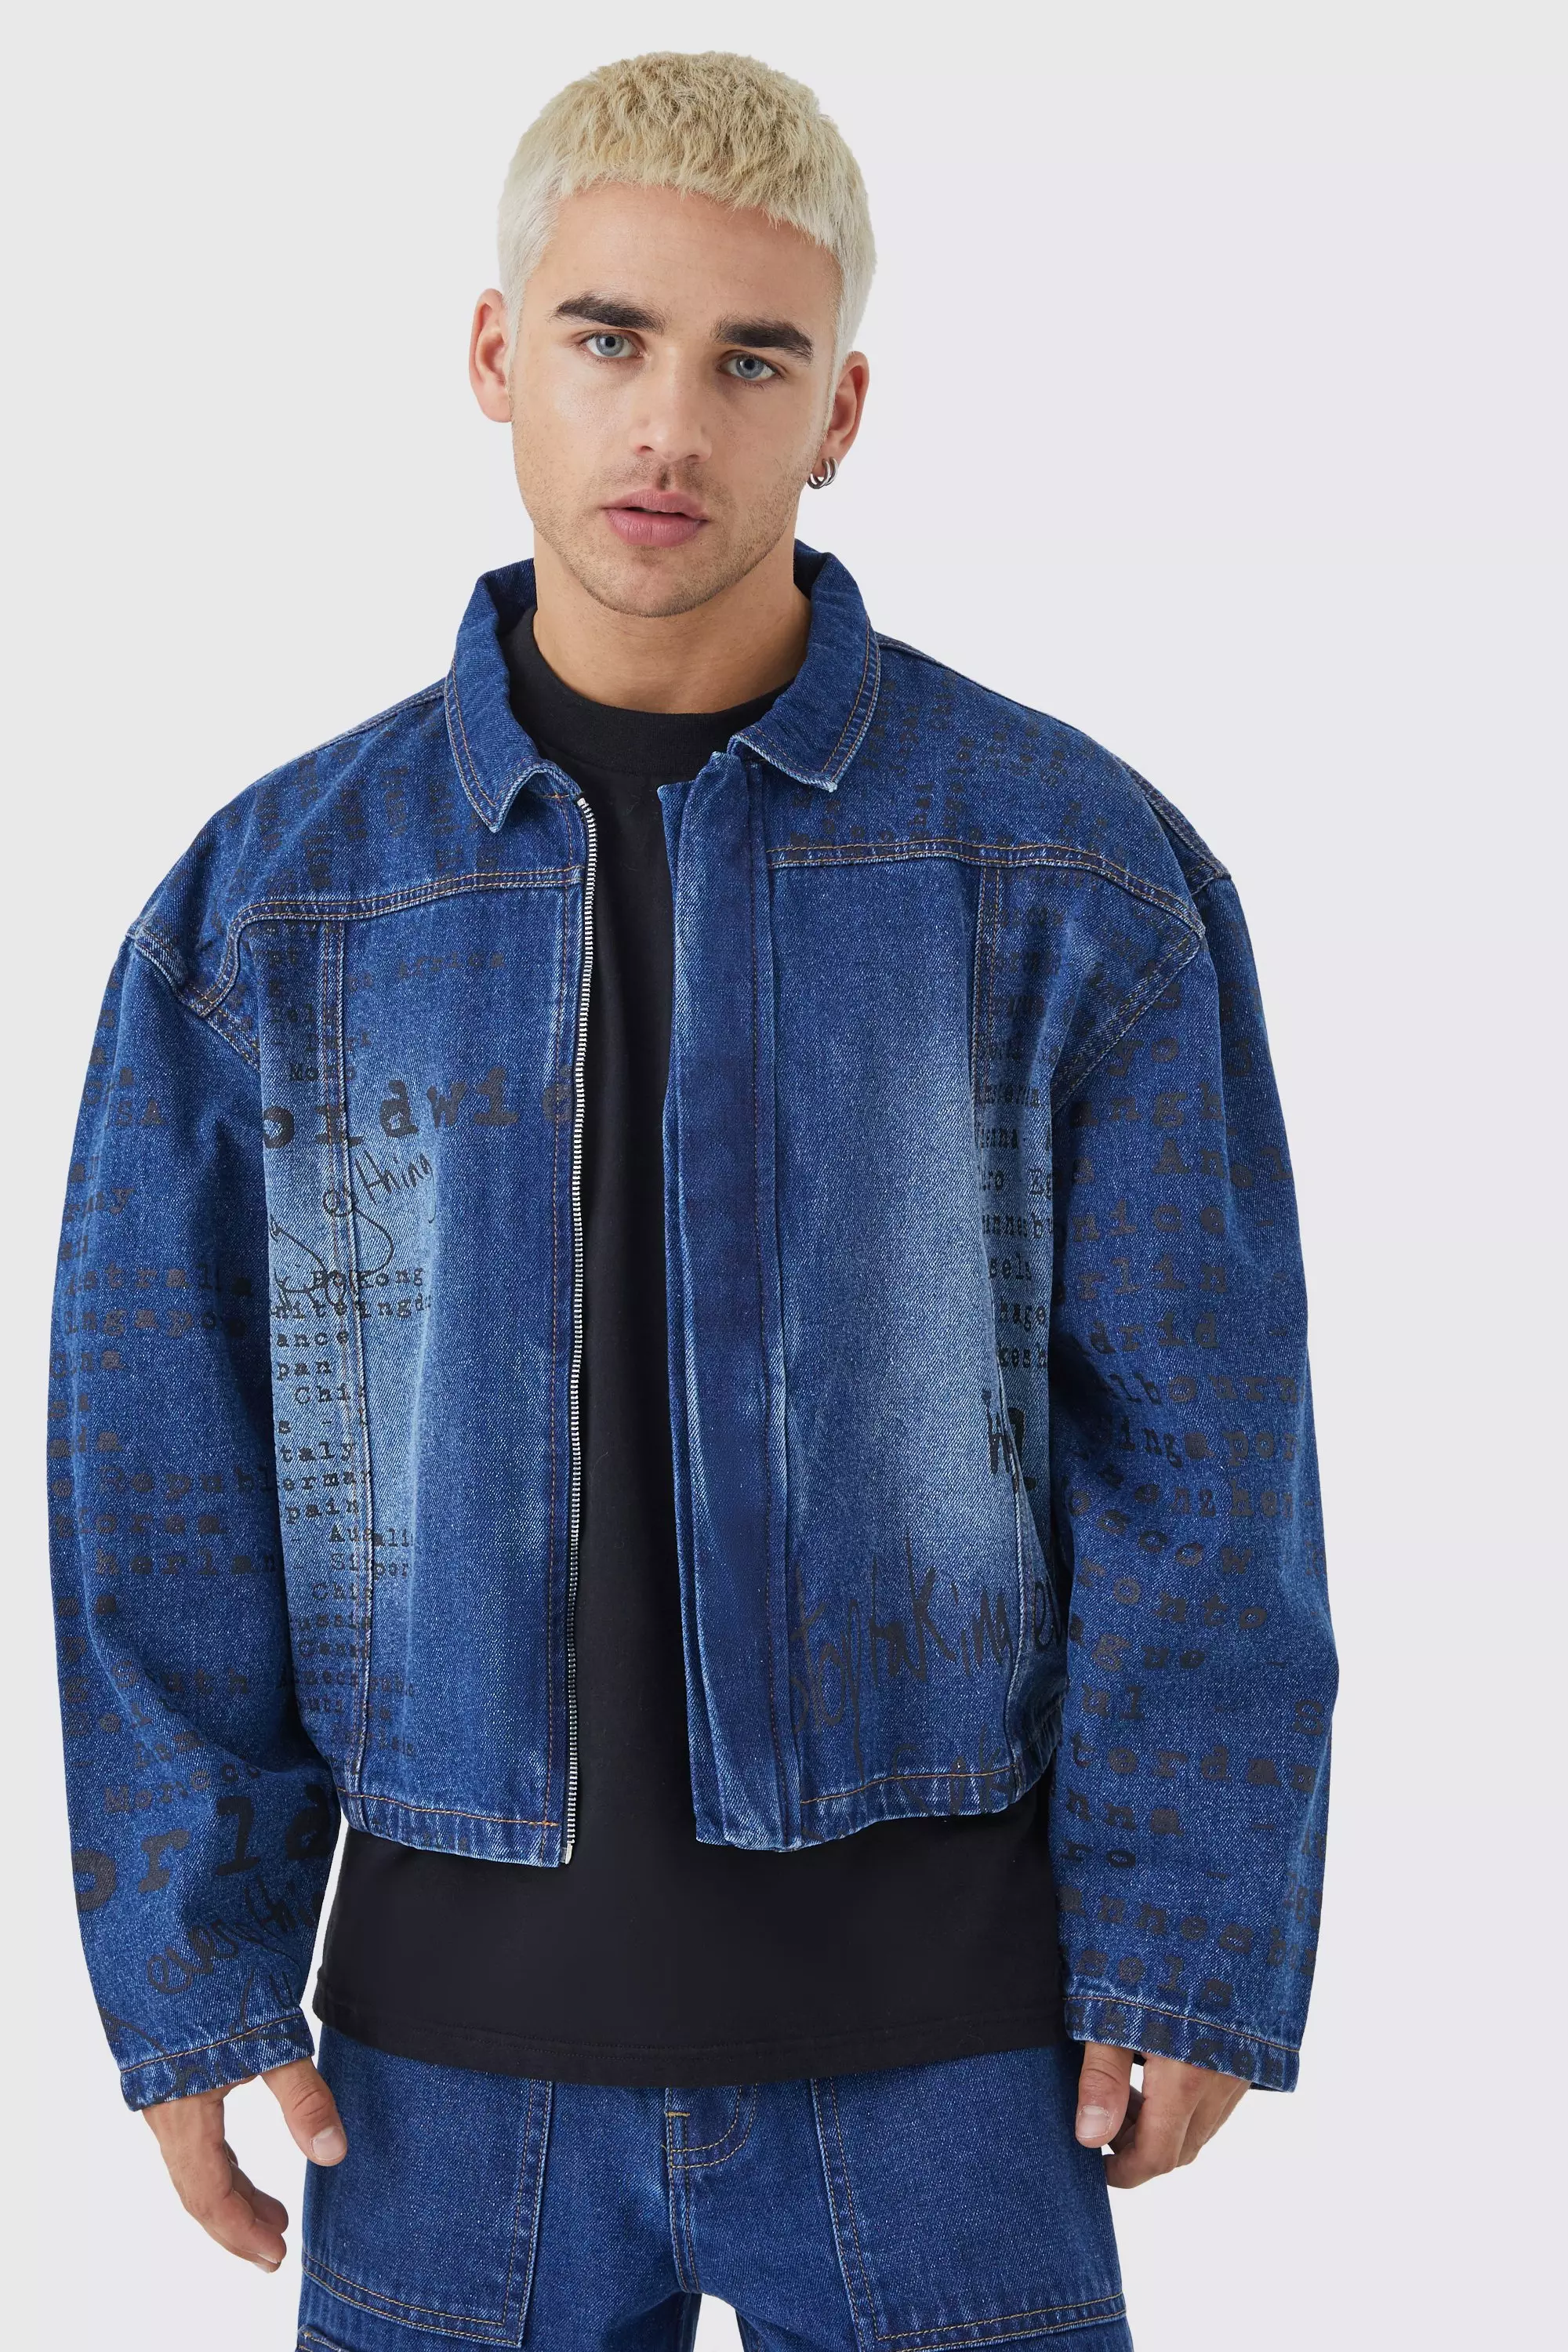 Boxy Fit All Over Text Laser Print Jean Jackets Mid blue